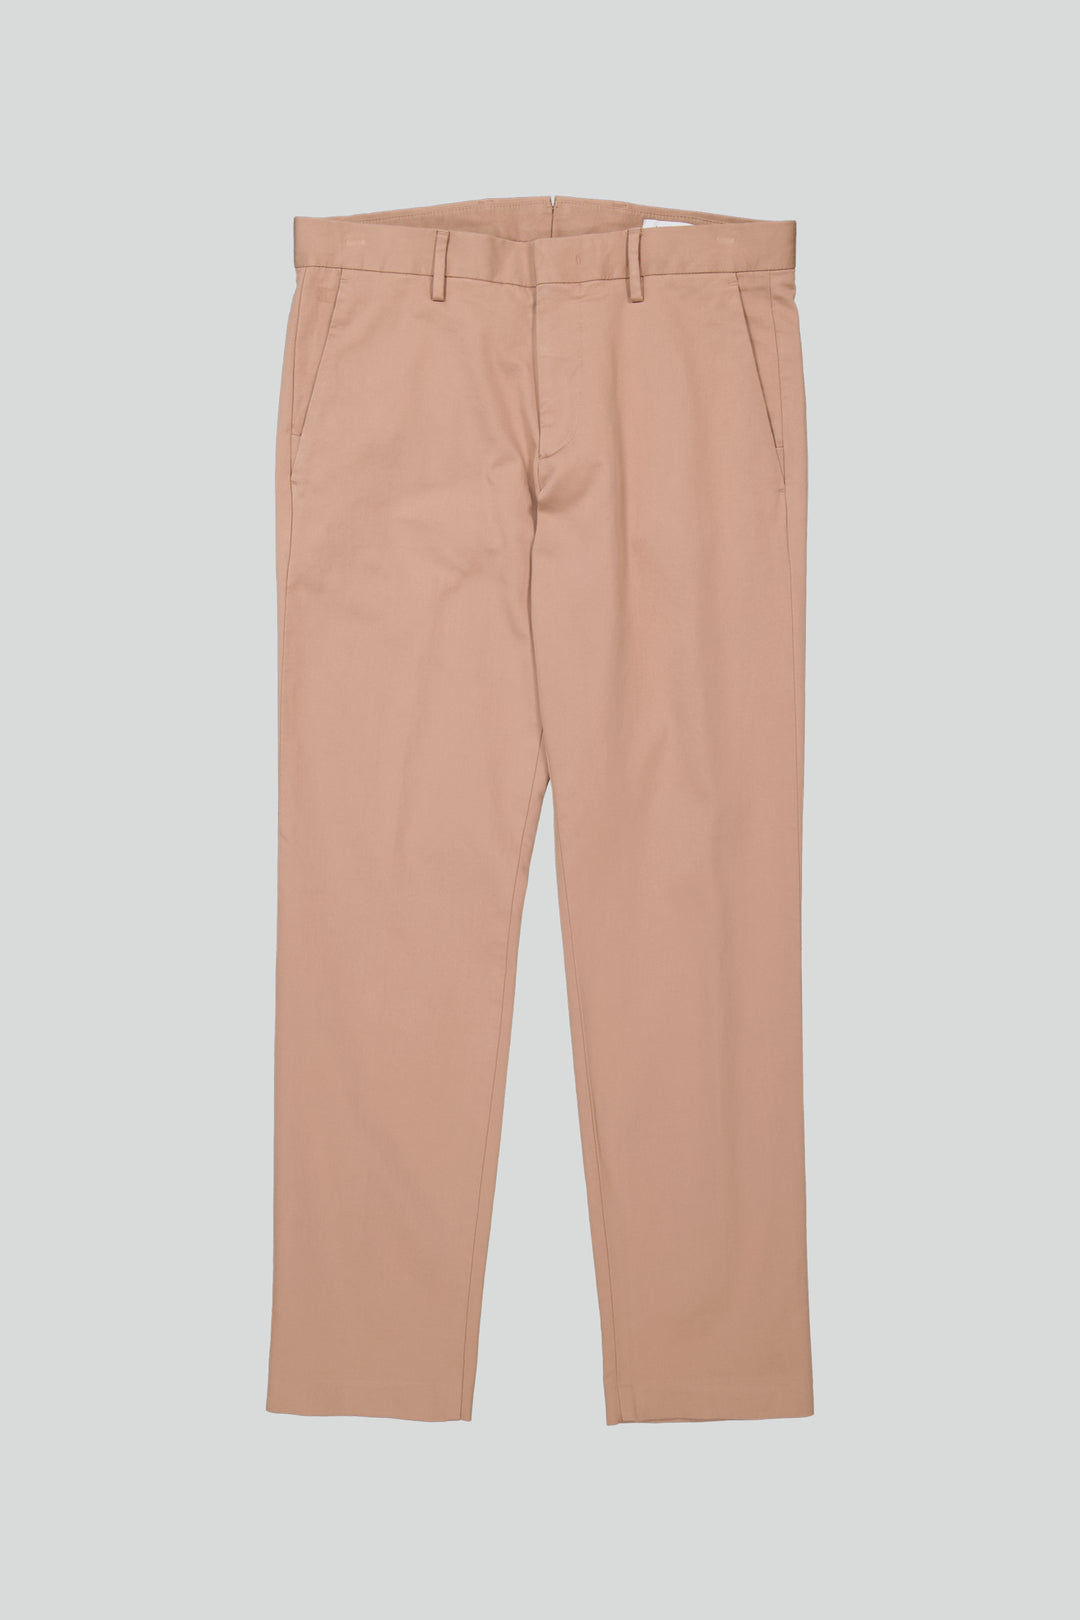 NN07 - Theo 1420 Pant in Nougat | Buster McGee